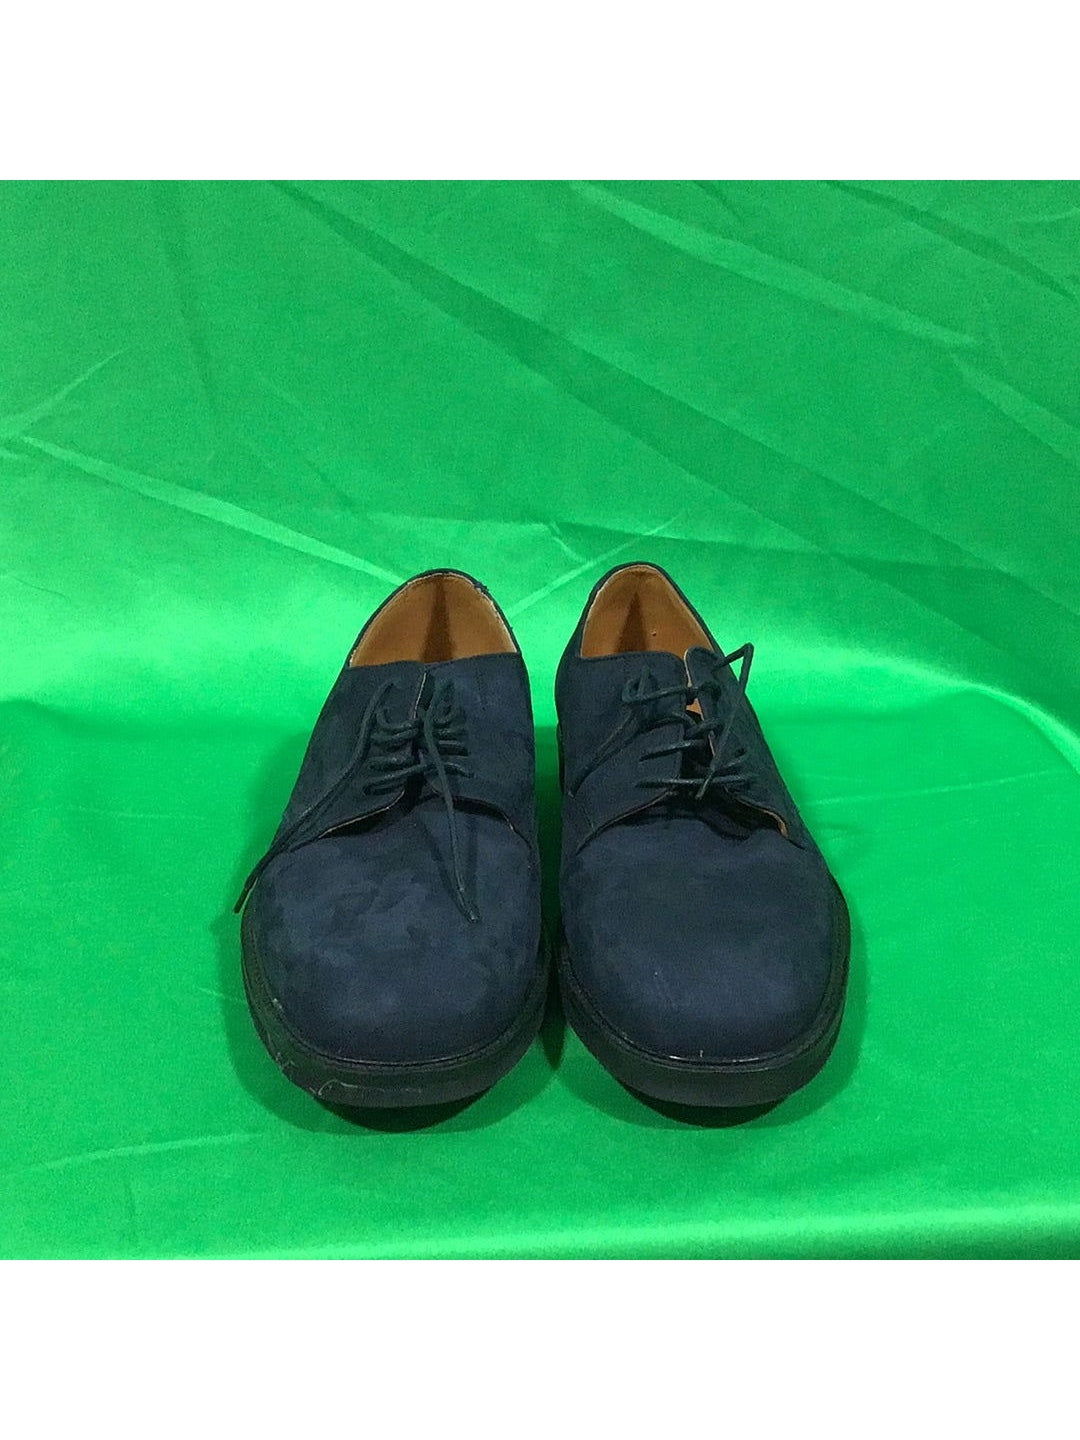 Dressabout Shoes 10 Men's Blue - The Kennedy Collective Thrift - 